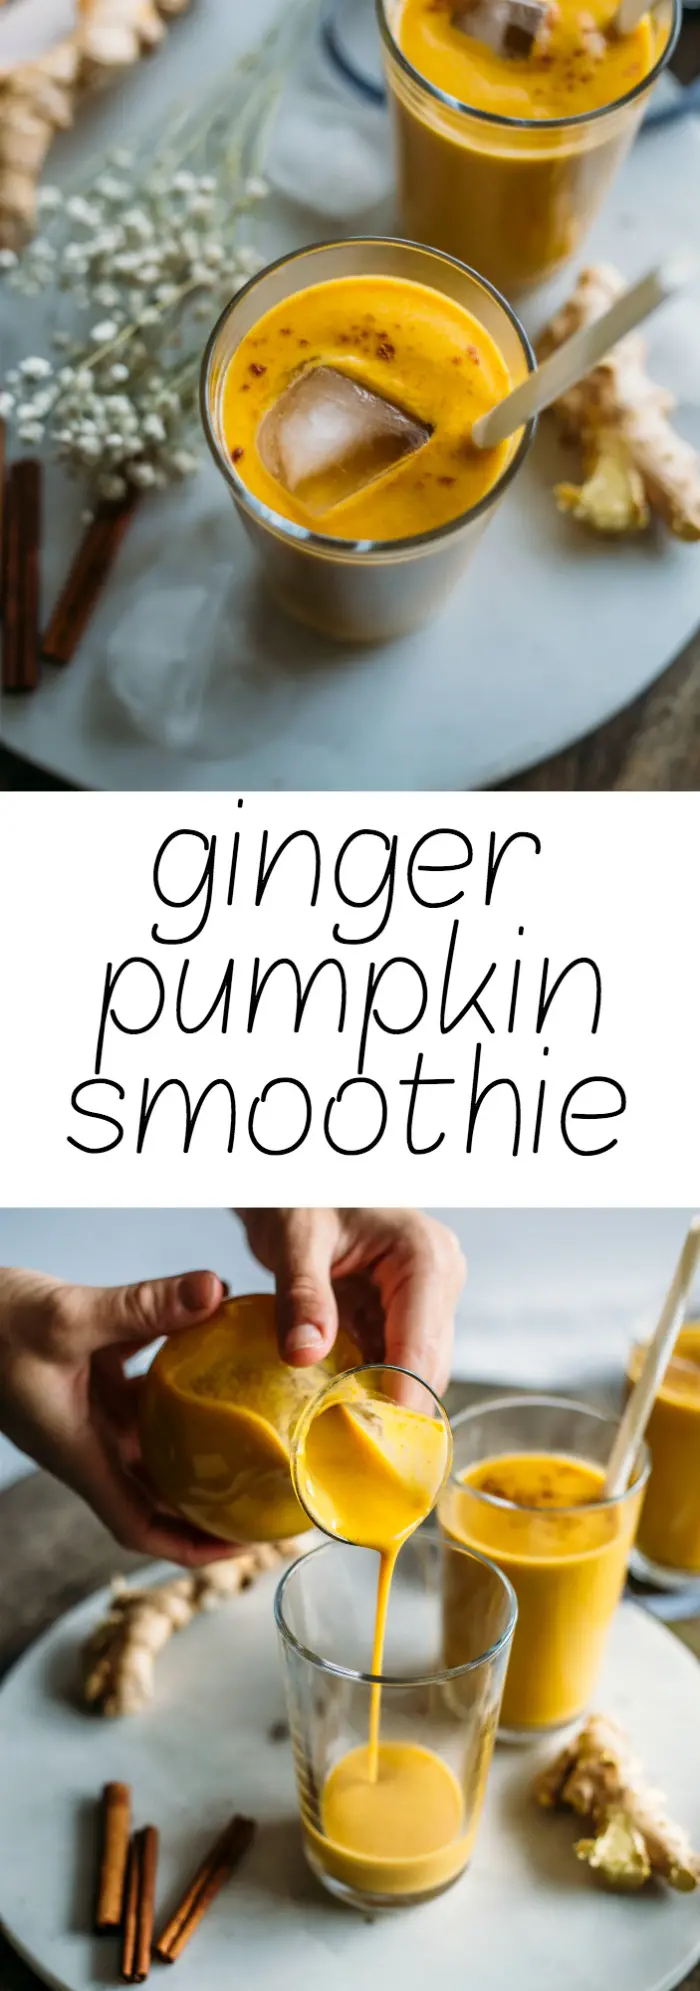 Ginger Pumpkin Smoothie |  Pumpkin-y flavor mixes with ginger and coconut milk in this creamy, dairy free smoothie recipe | thealmondeater.com | #vegan